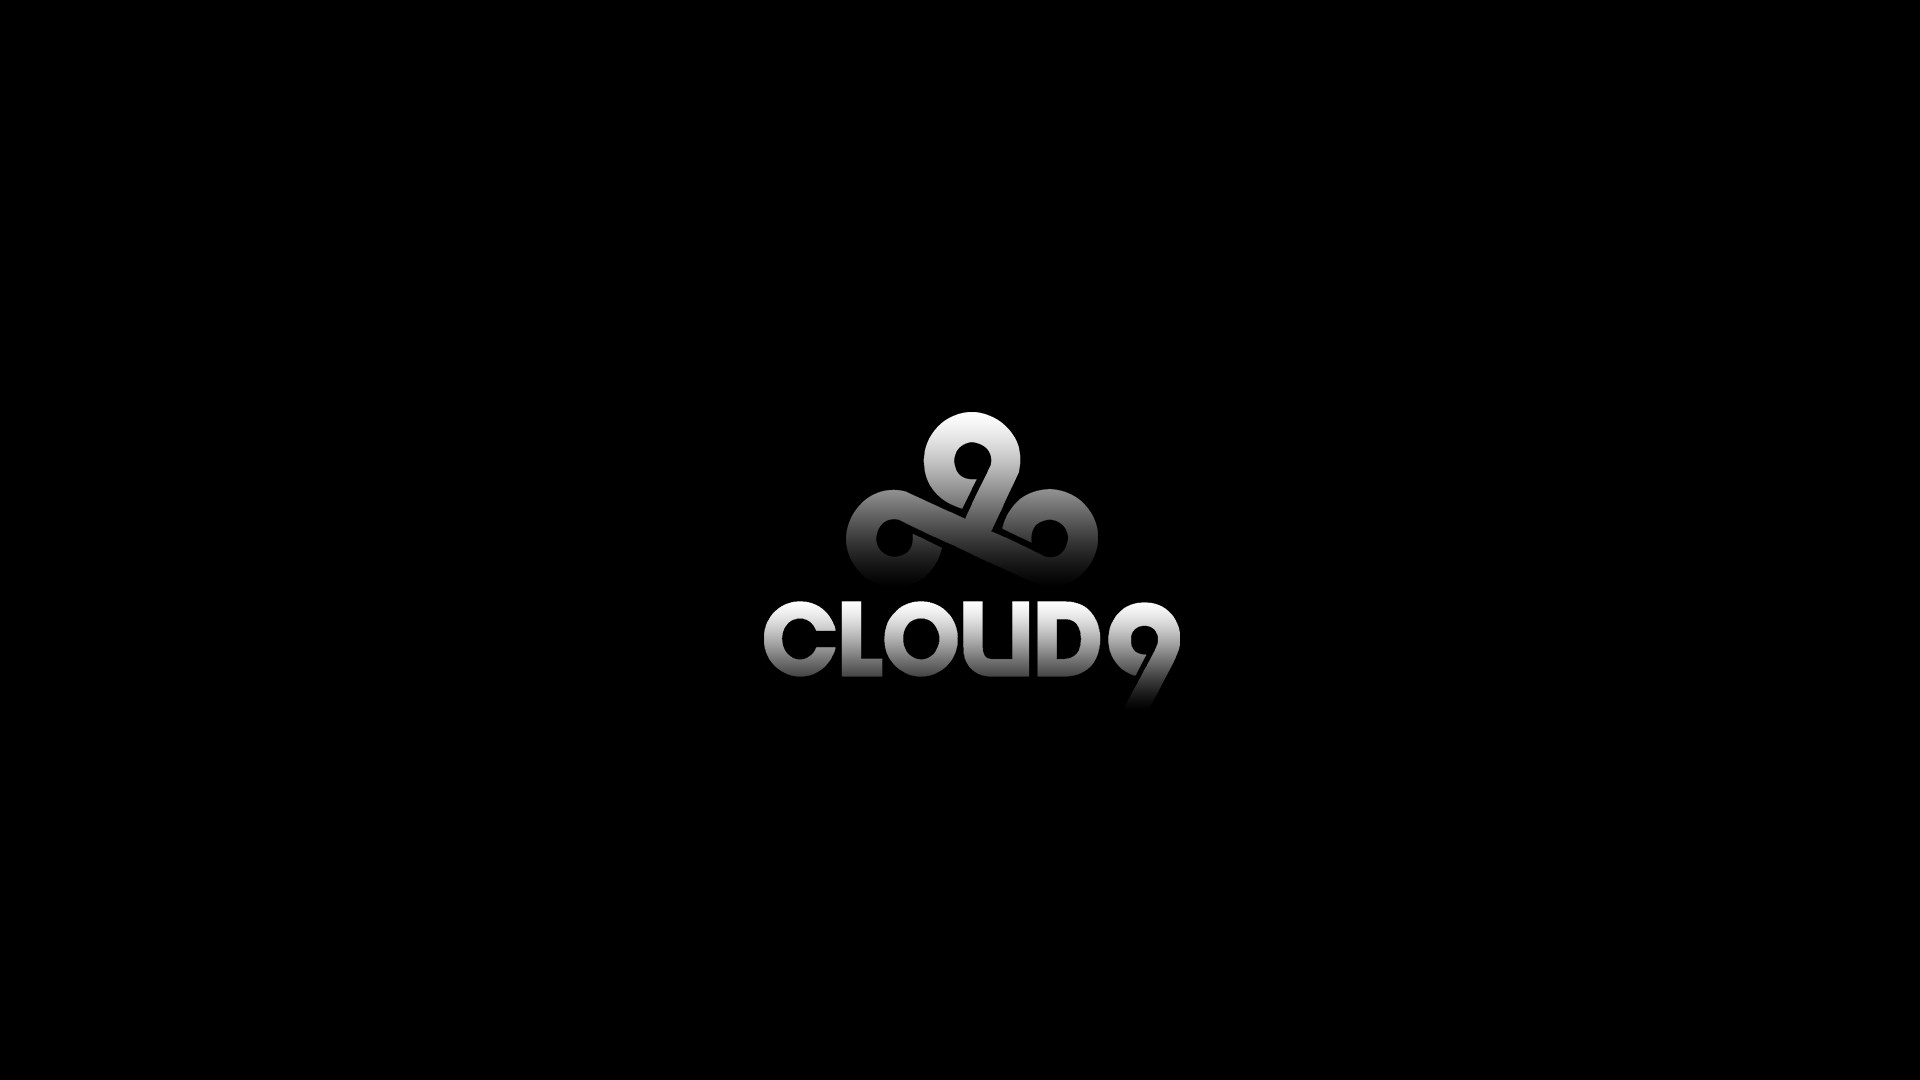 C9 Wallpaper I made 1920×1080 Need #iPhone S #Plus #